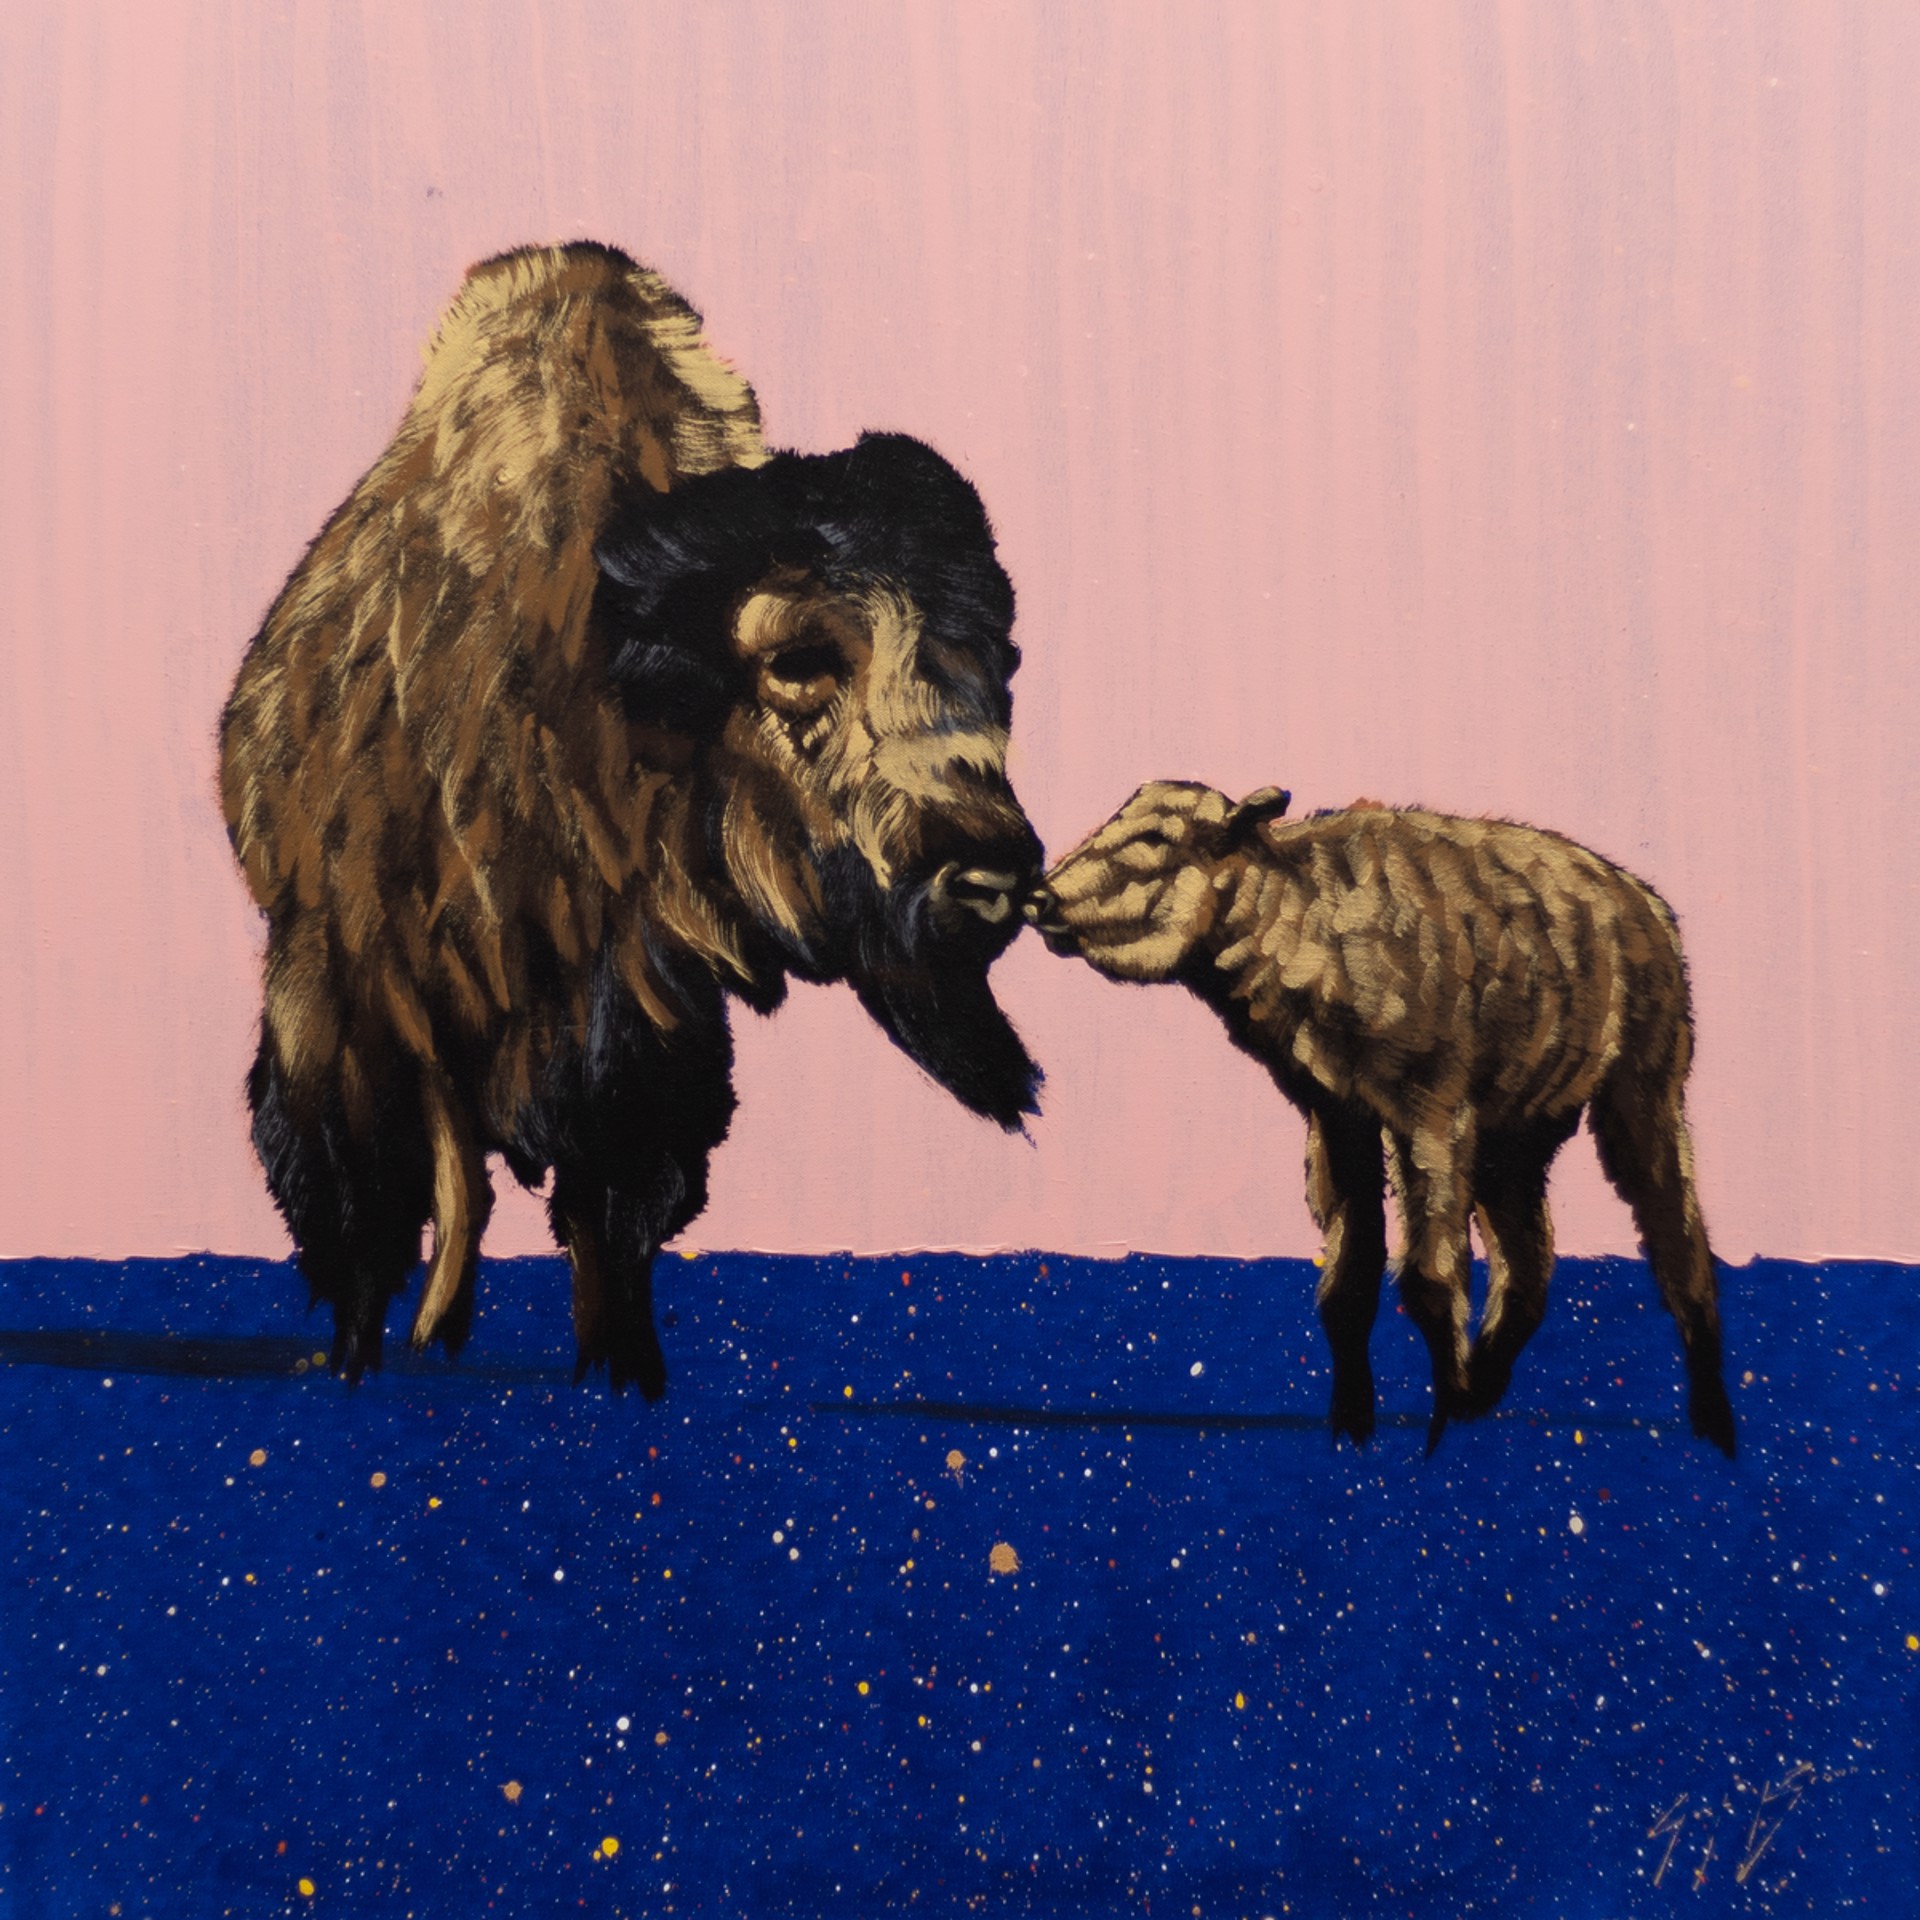 Buffalo Mother and Child by Josh Brown